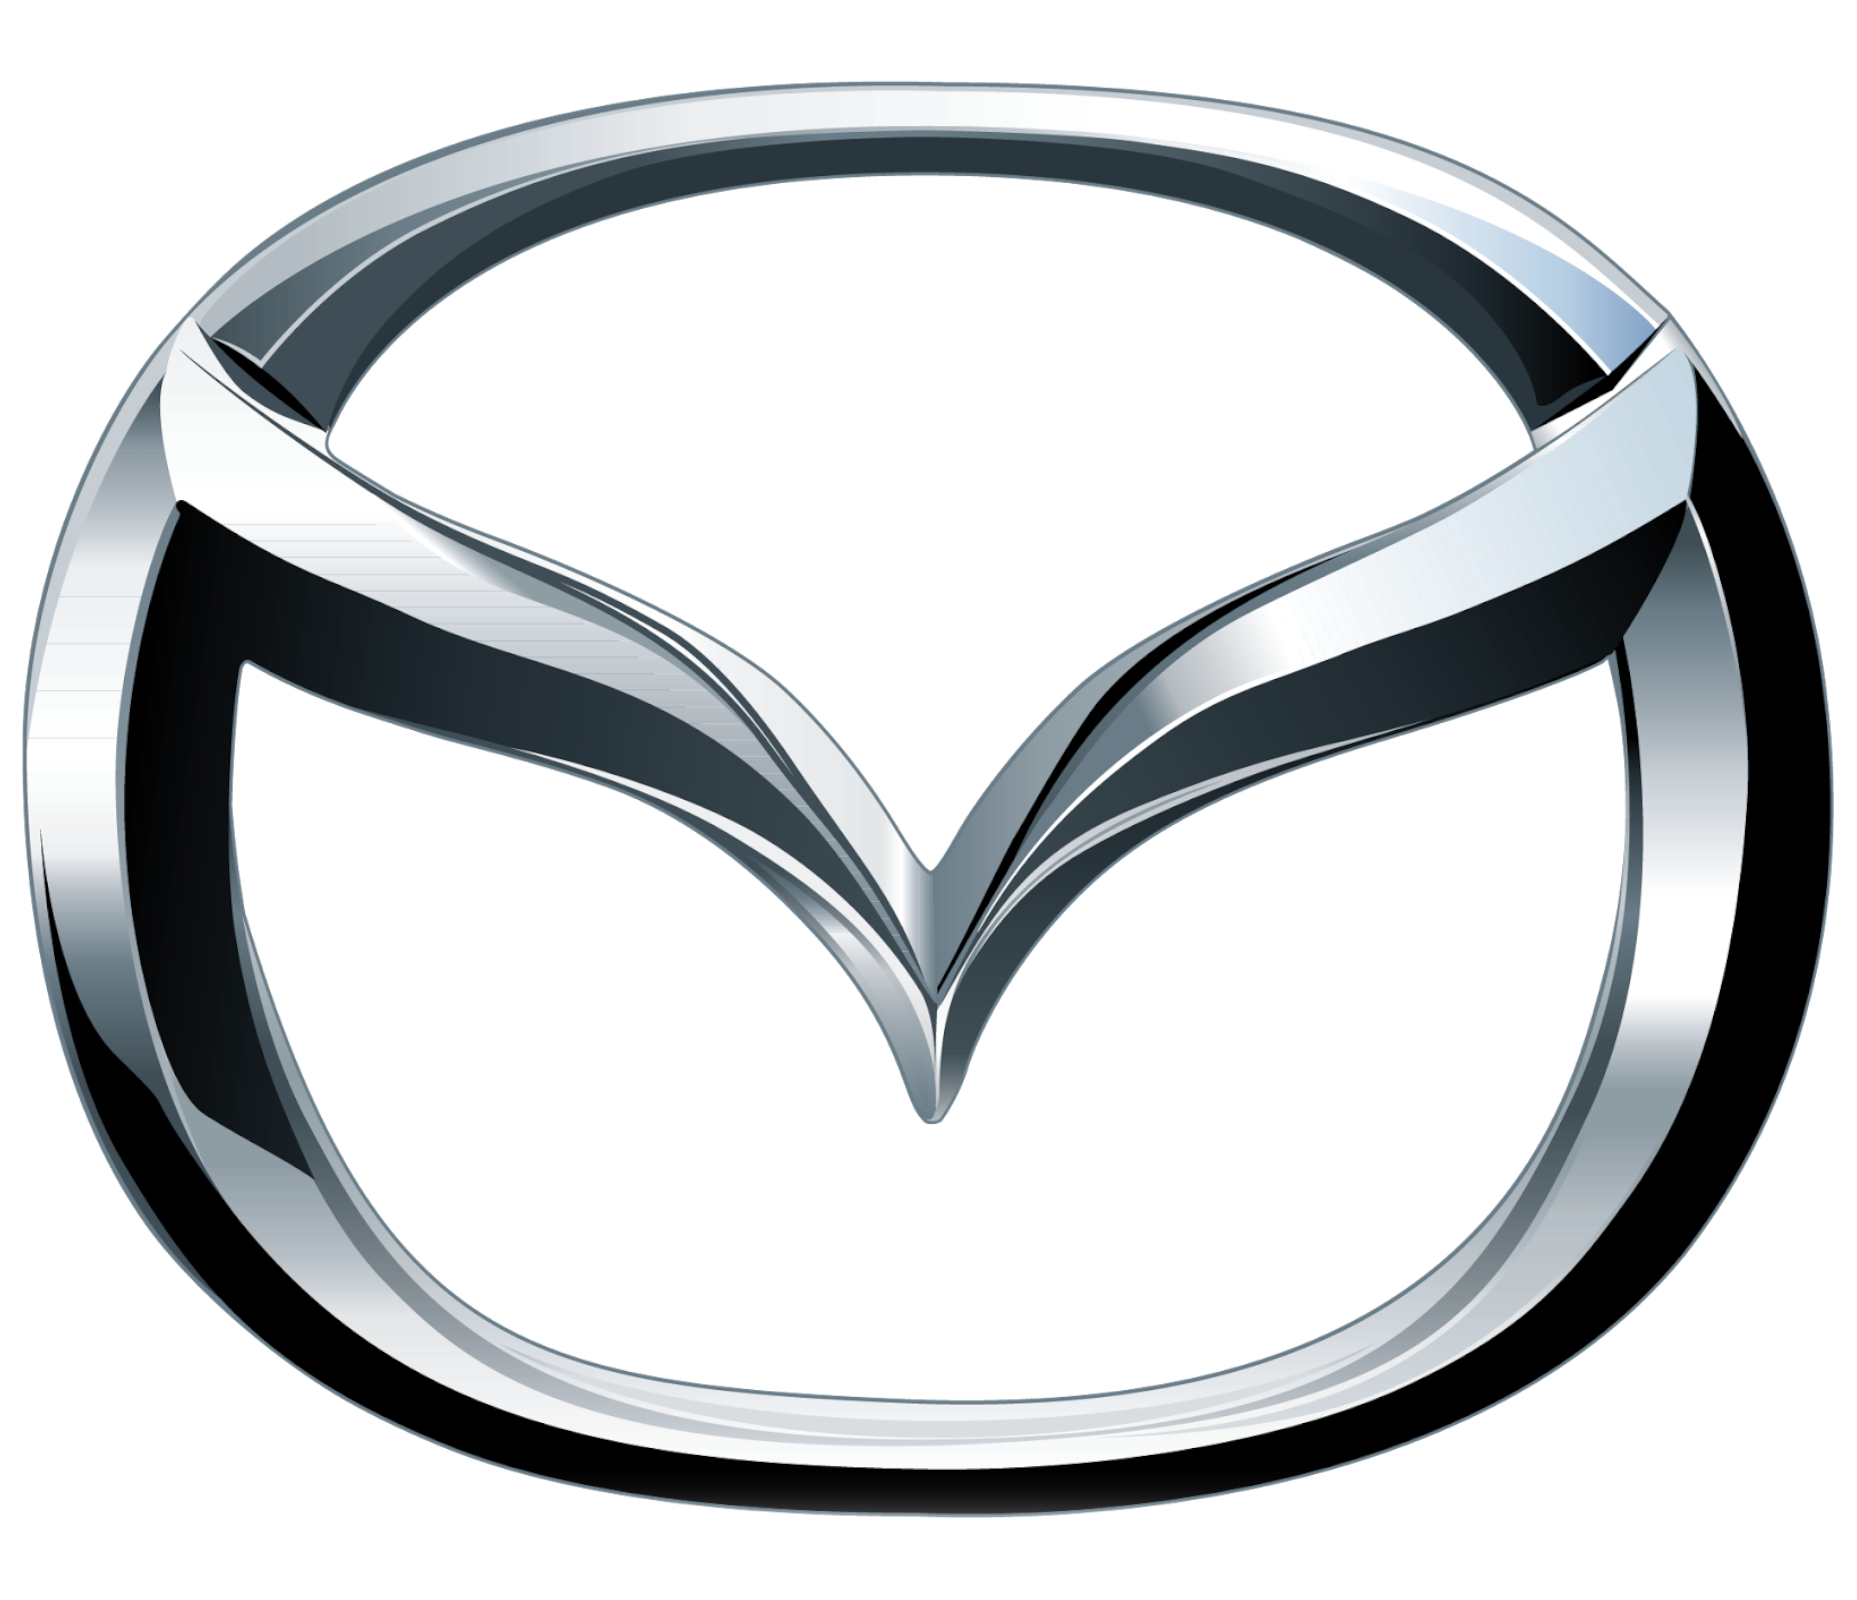 Used Mazda Vehicles for sale in Laval, QC - AutoZoom